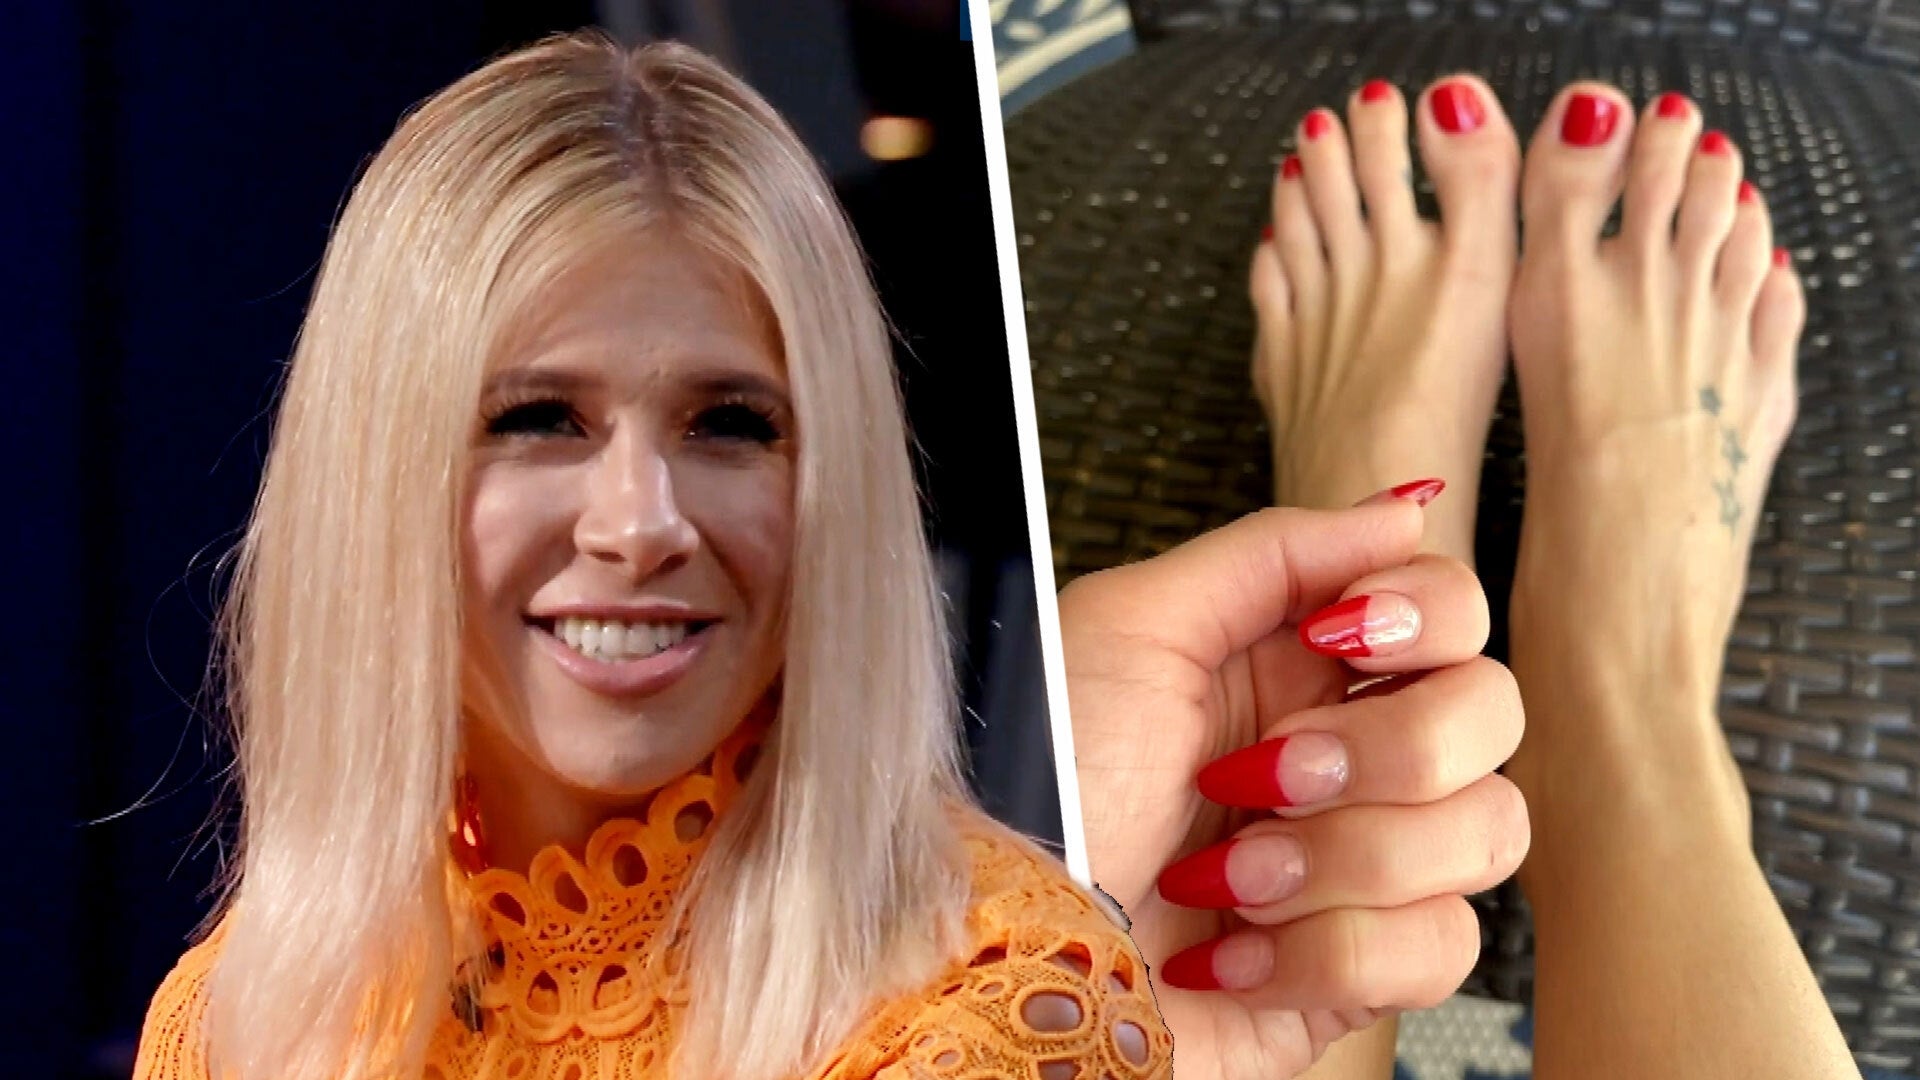 90 Day Fiancé Charlies Wife Megan Reveals She Sells Pics of Her Feet pic picture